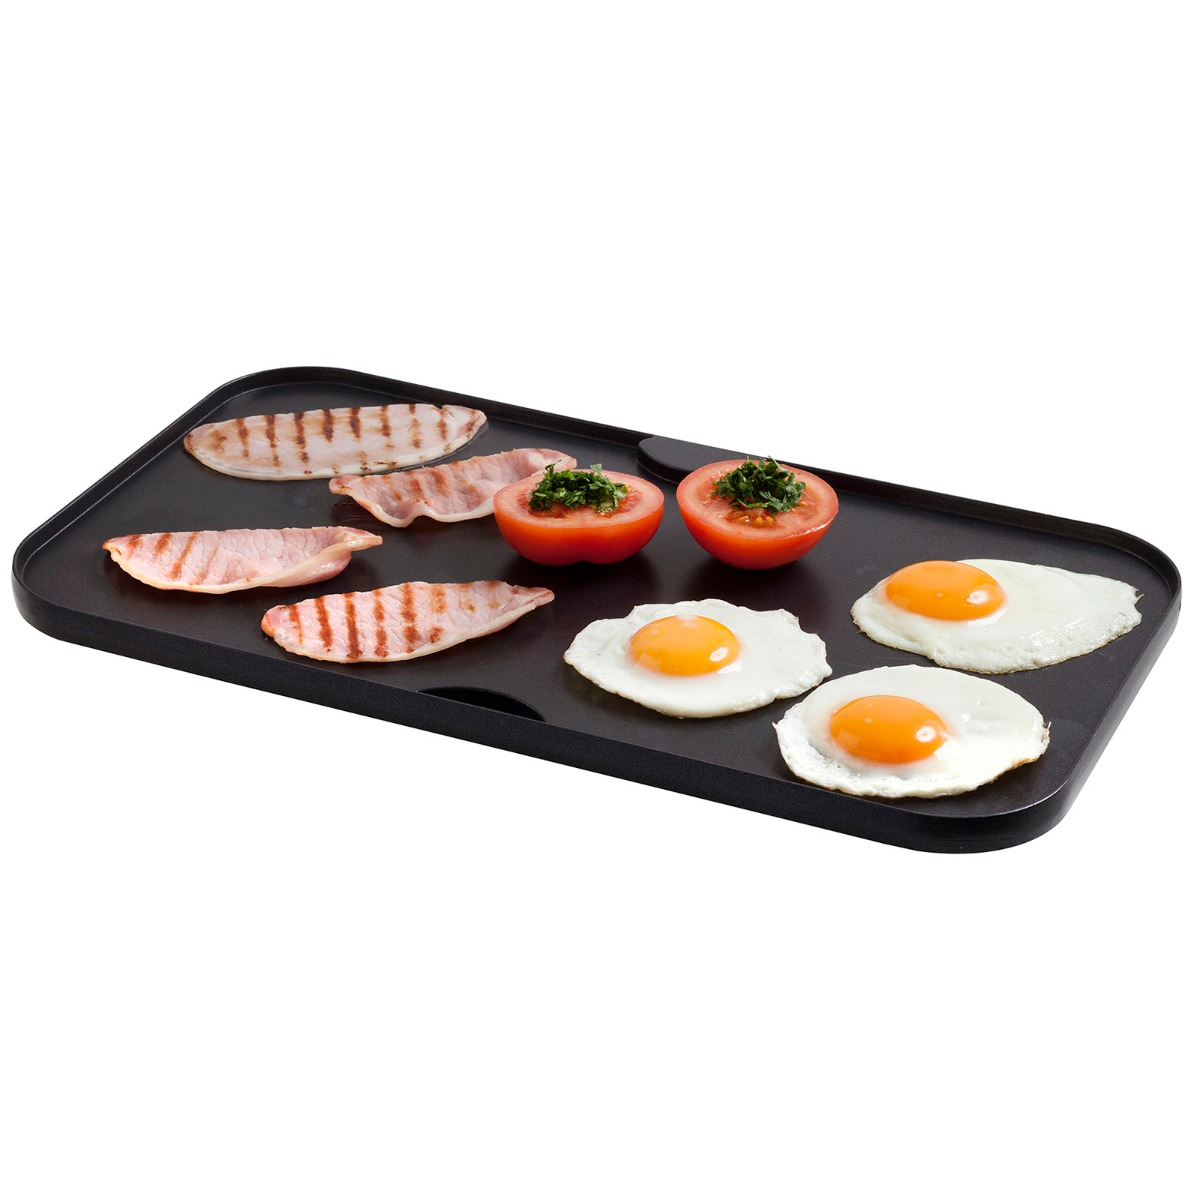 GASMATE Deluxe Double Grill Plate - Non Stick